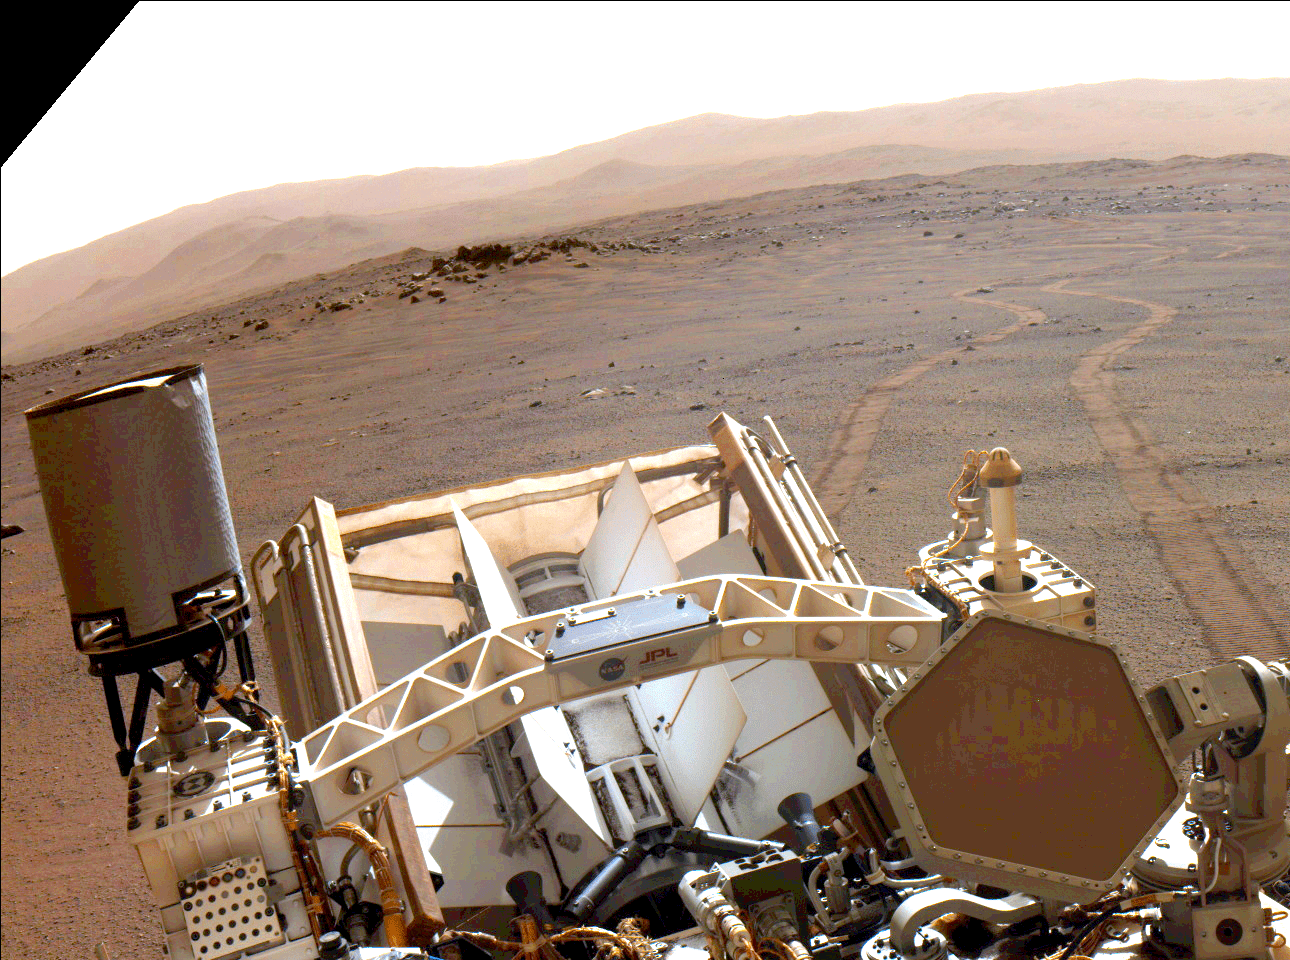 A close-up view of the Multi-Mission Radioisotope Power System on the back end of the Perseverance rover. The rover’s tracks snake through the Martian sand toward a clay-colored mountain range.